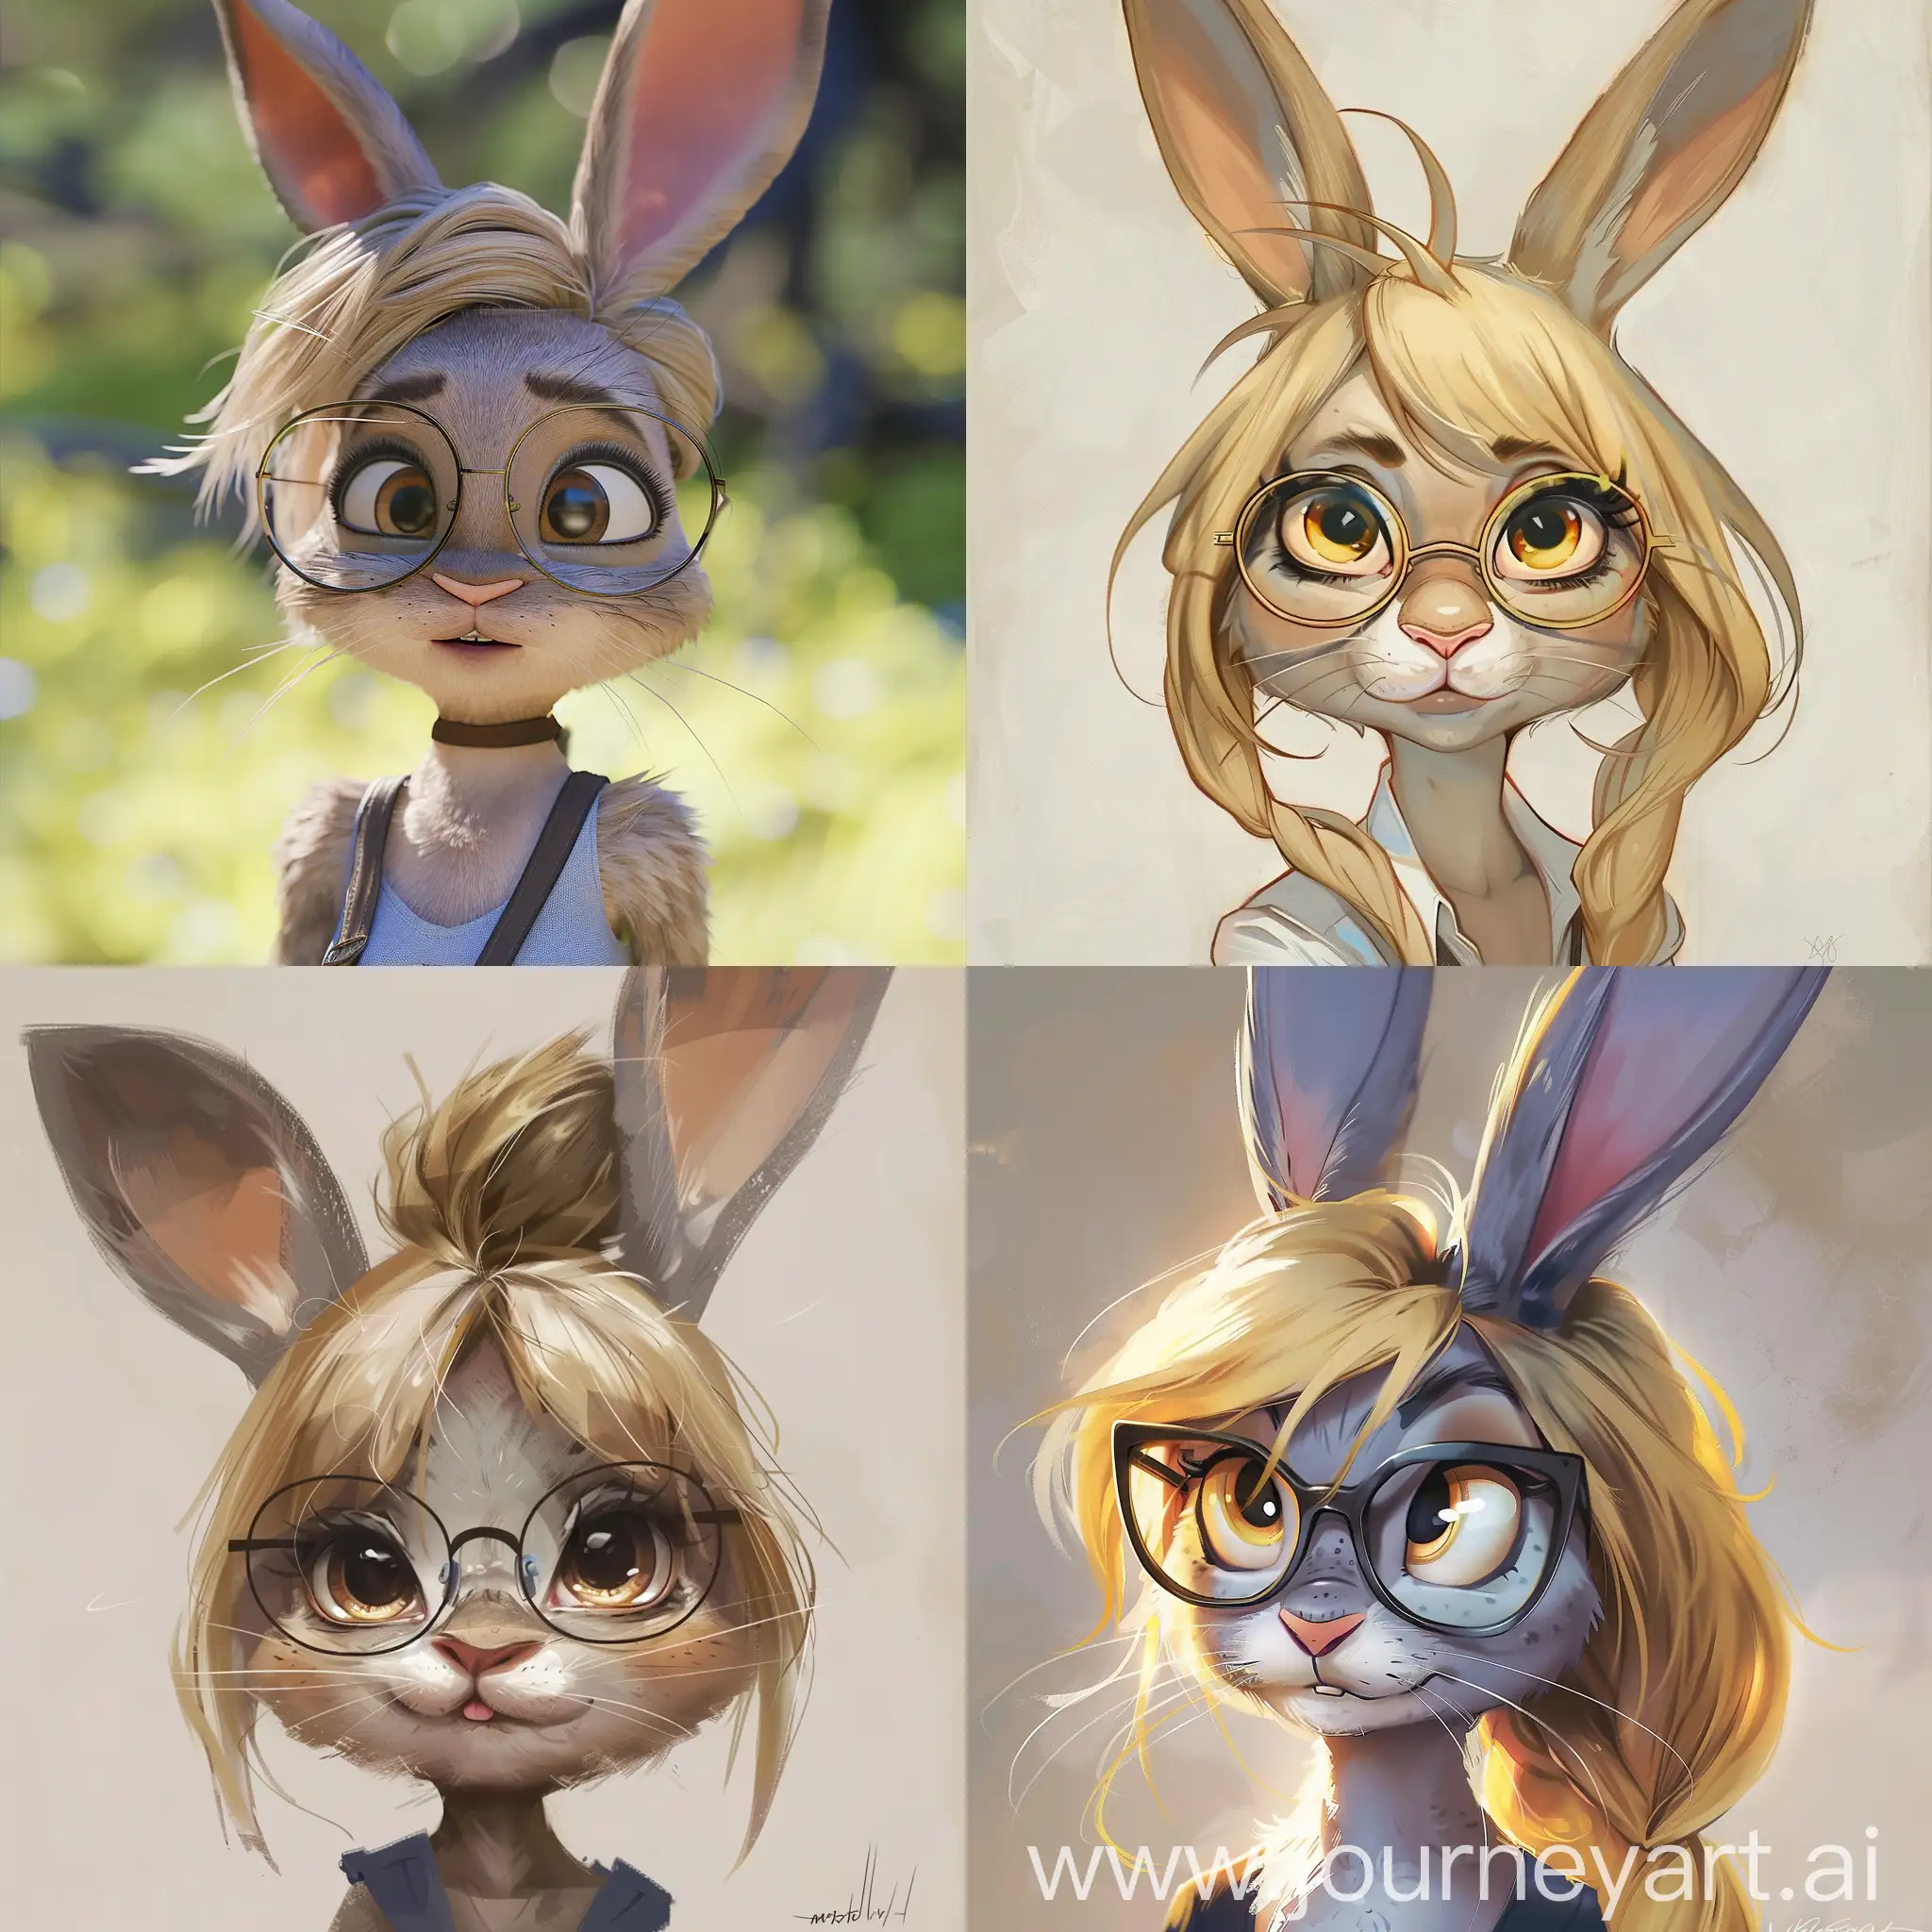 A female bunny with blonde hair and glasses